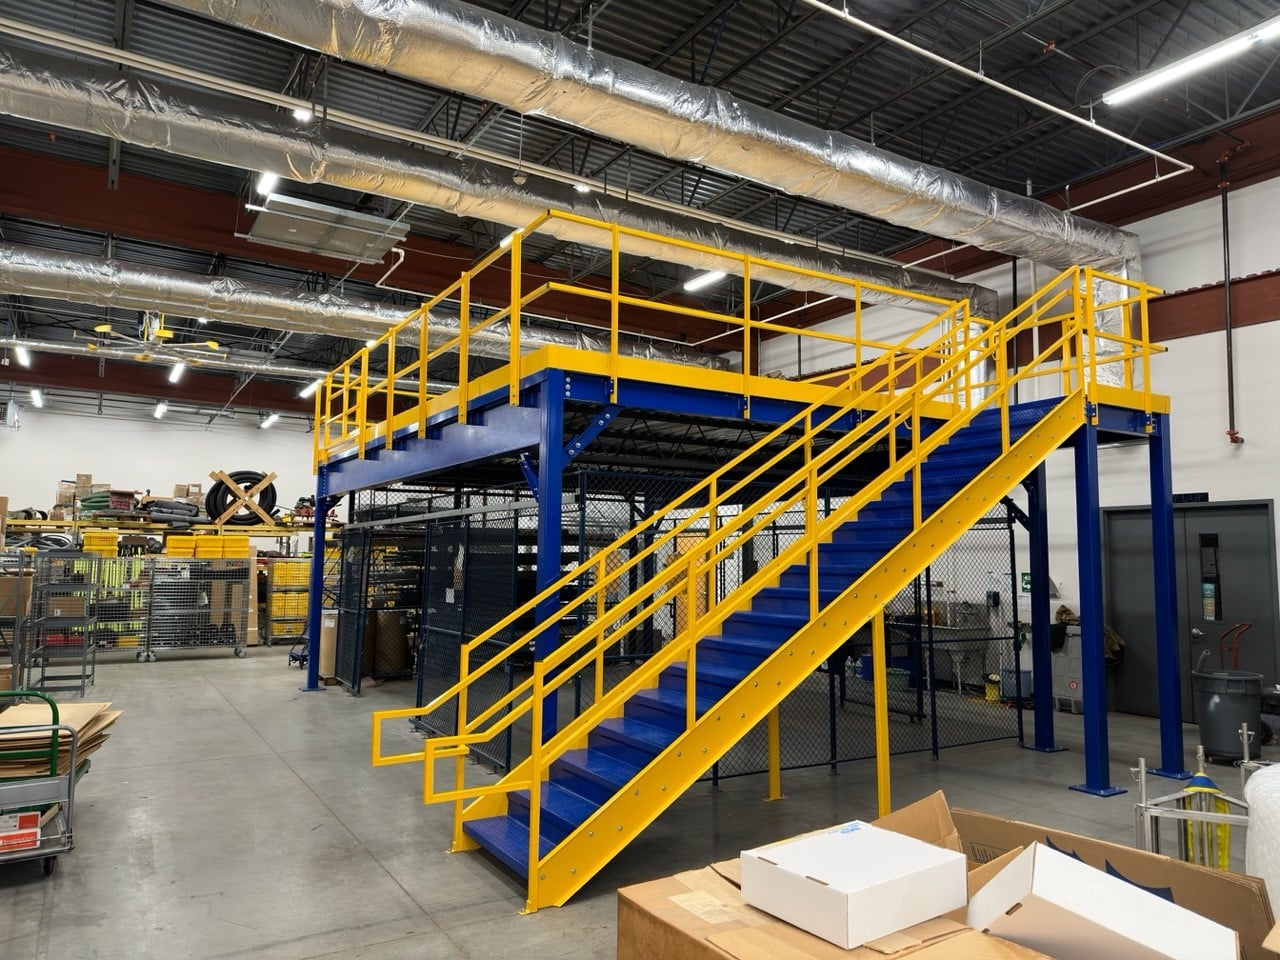 Yellow and blue mezzanines and work platforms